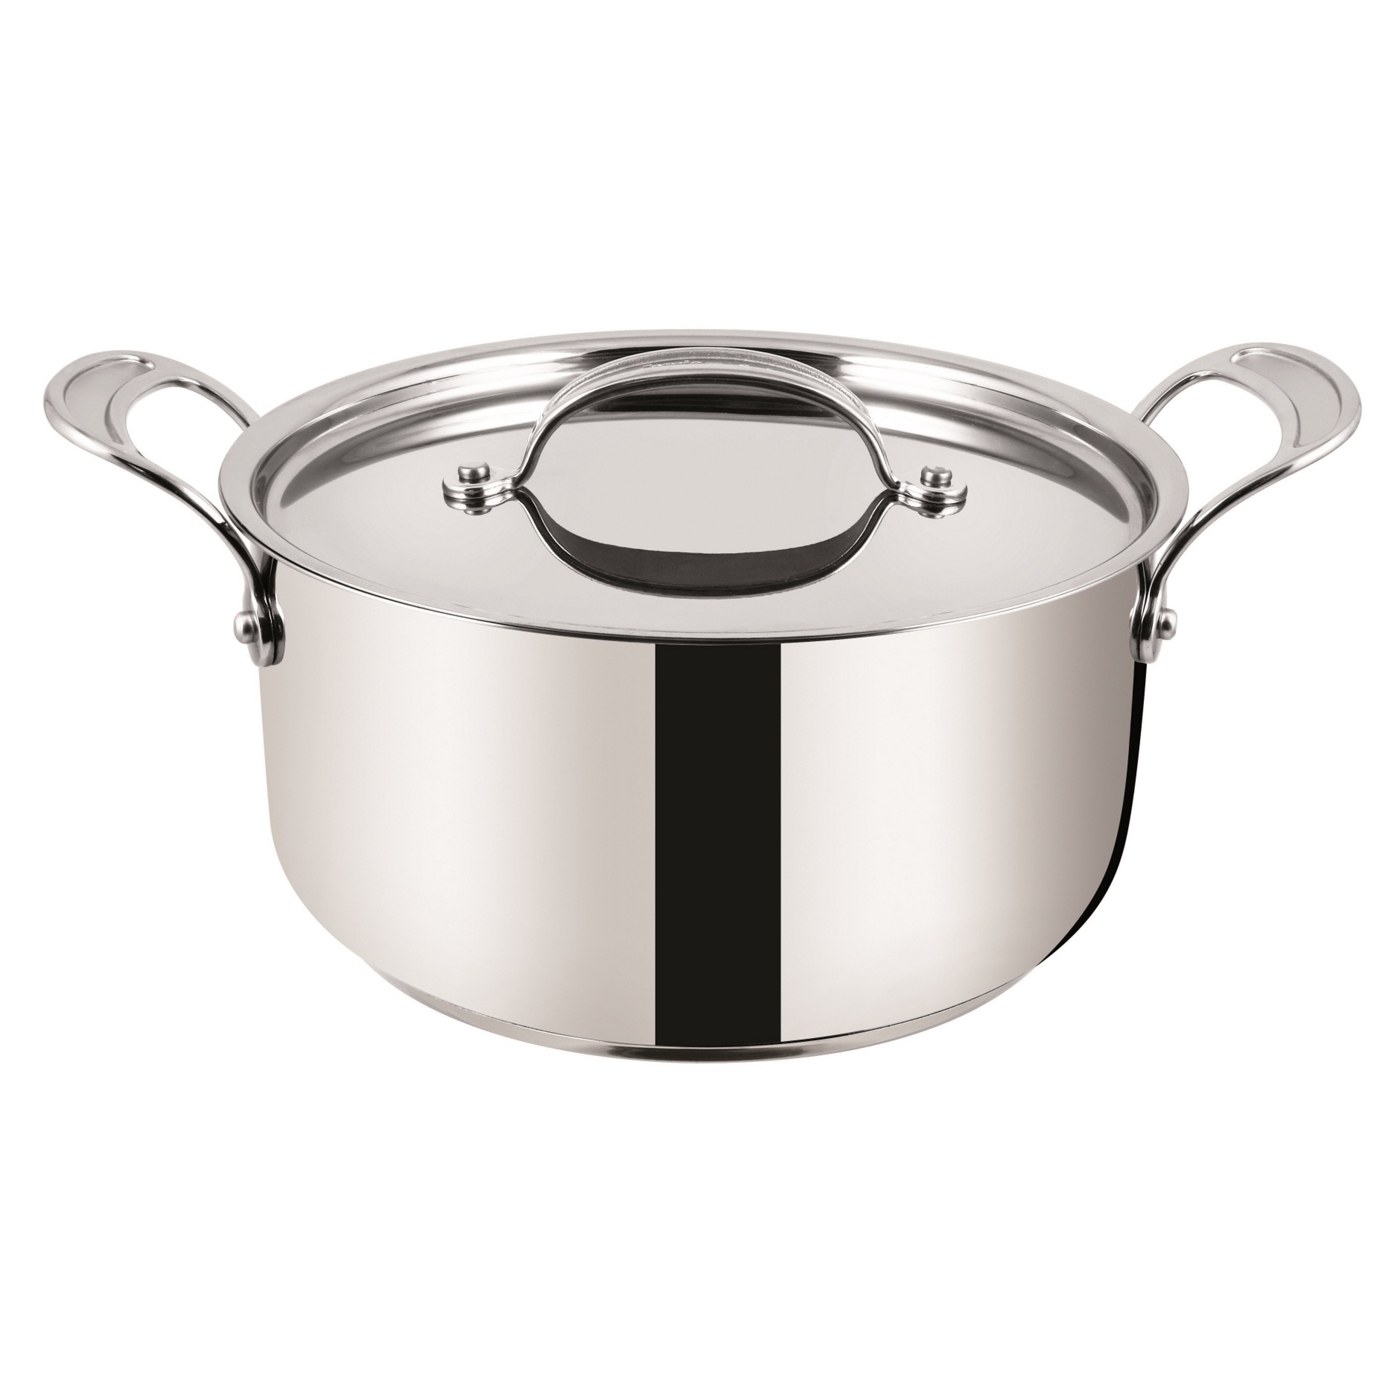 Jamie Oliver By Tefal Stainless Steel professional series stew pot with lid 24cm